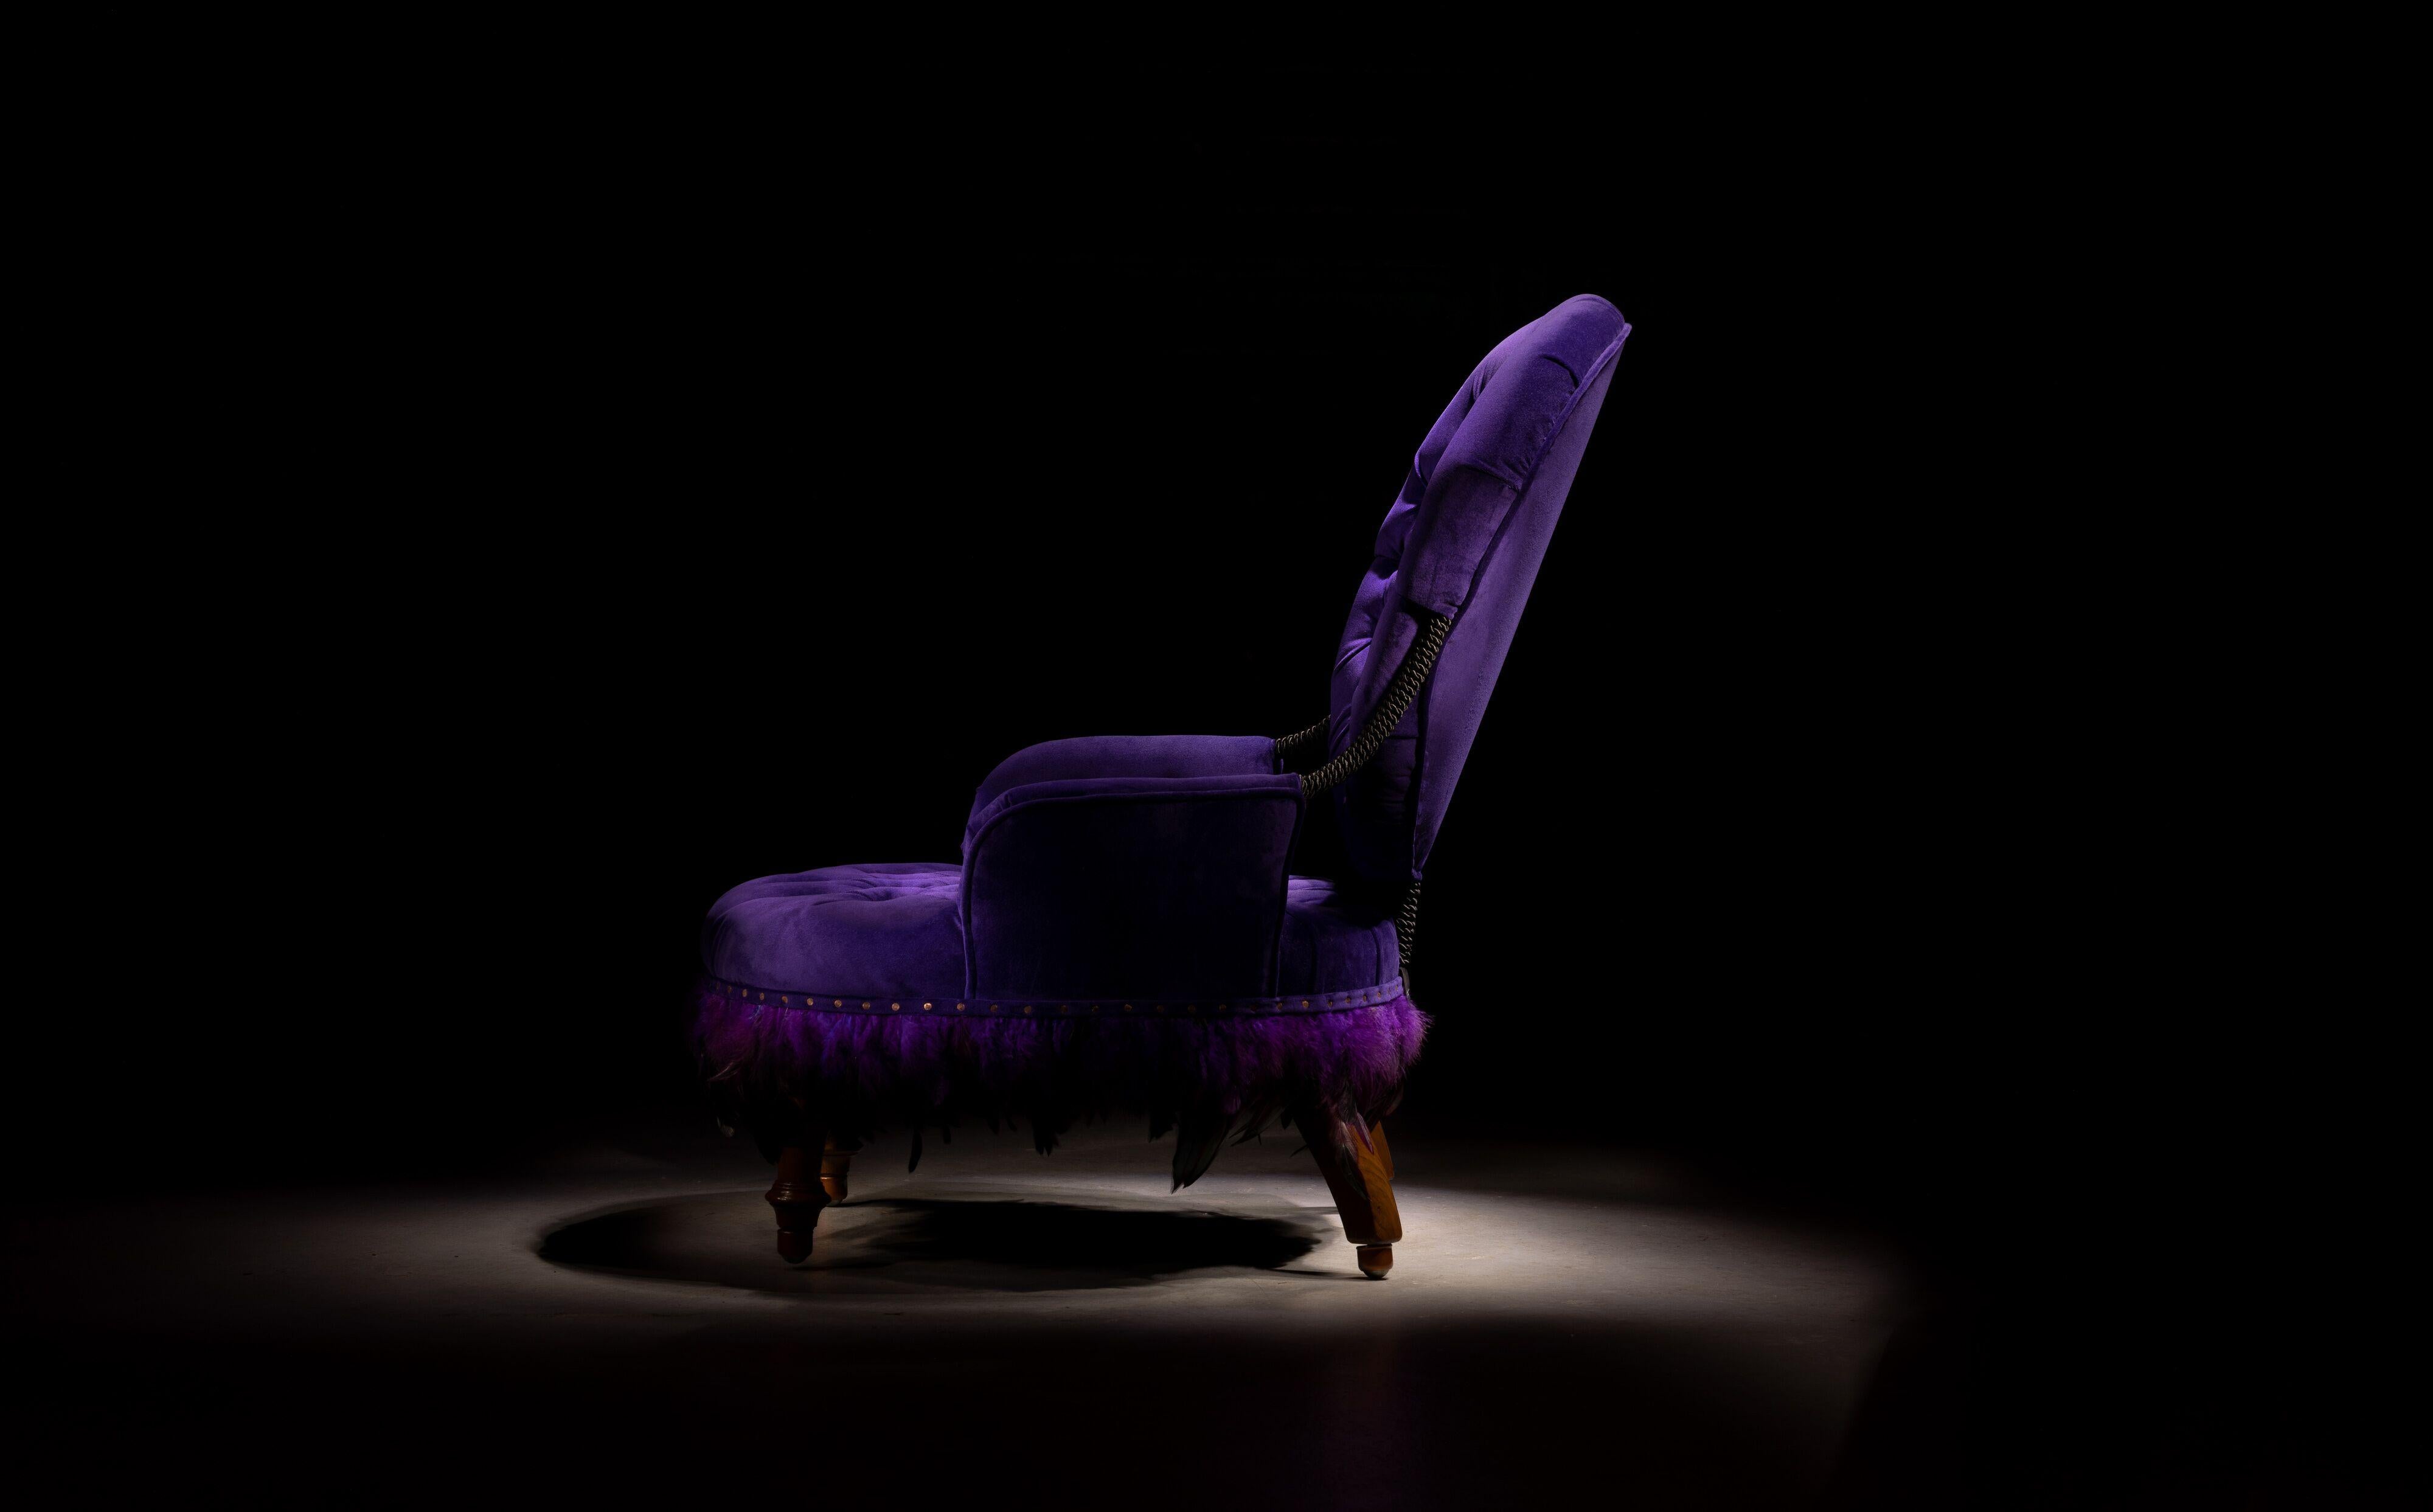 Antique salon chair purple reign burlesque chair, circa 1875

A truly unique one-off piece of furniture art in the form of a beautiful iron-framed Victorian chair that has been recreated into this stunning piece of eclectic furniture.

Fully